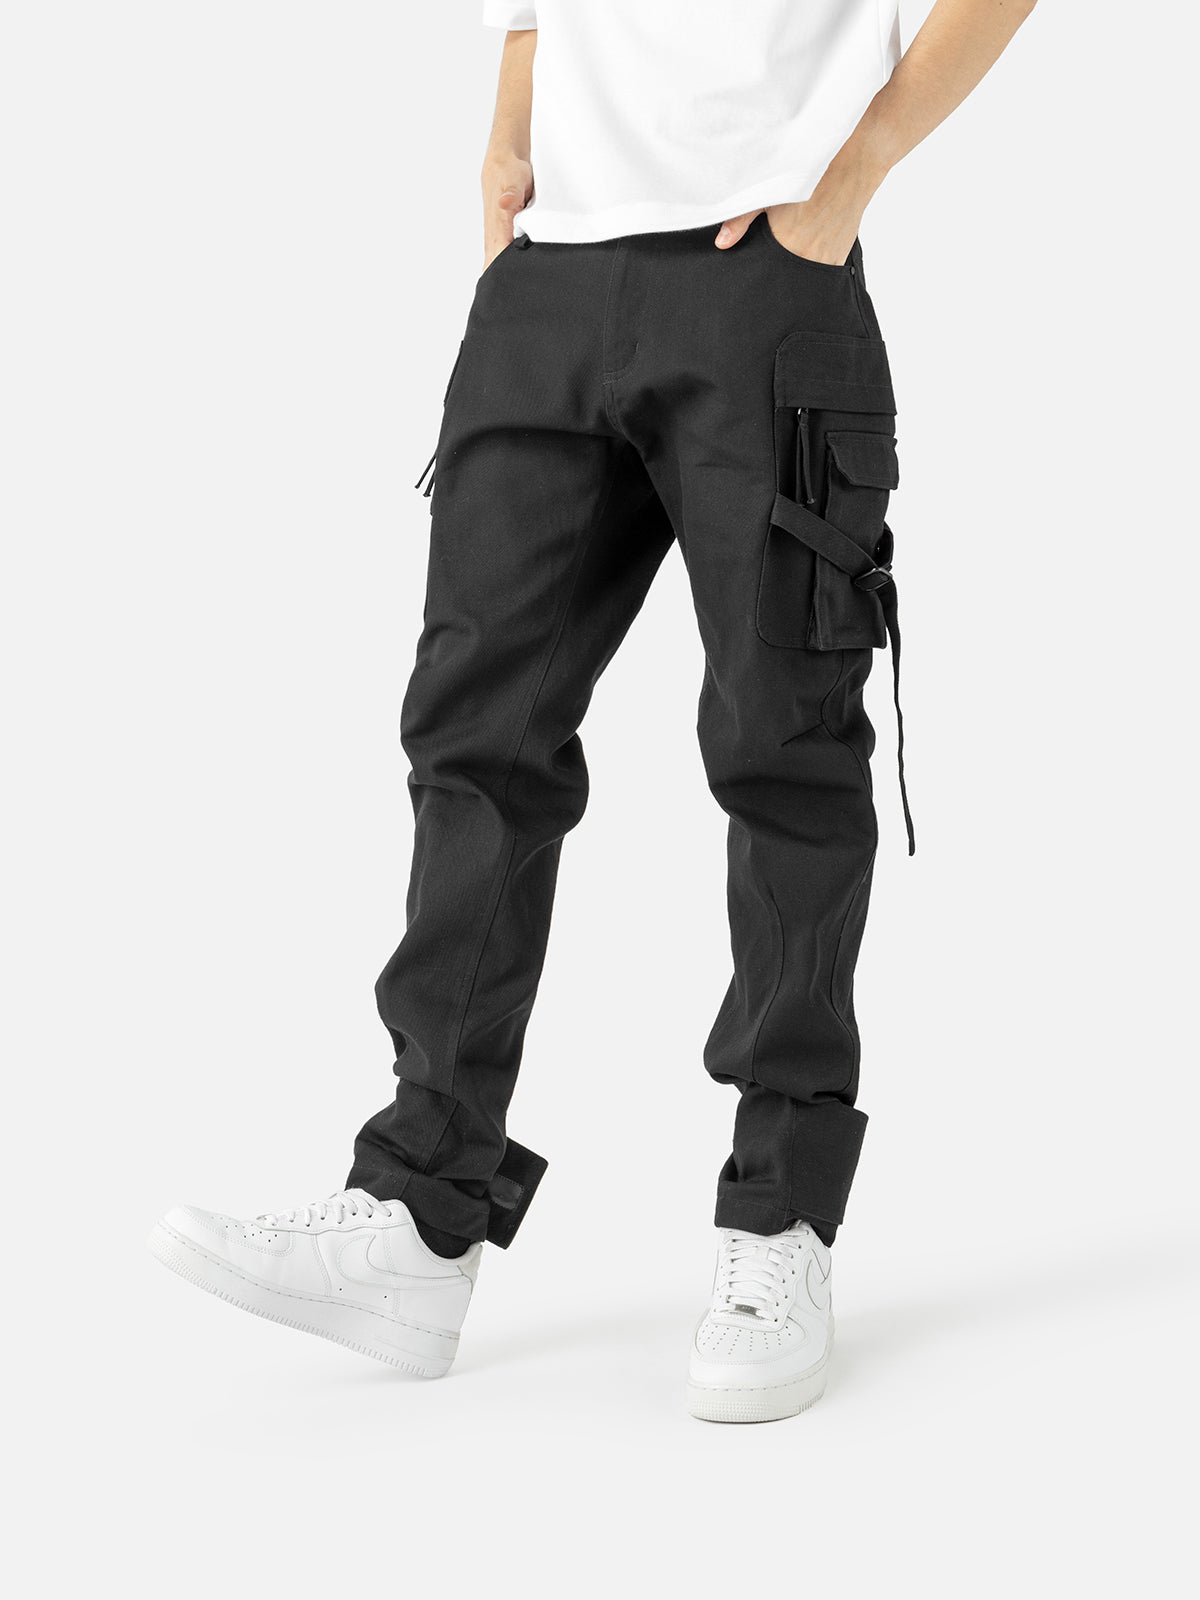 Buy Black Side Pocket Straight Cargo Pants Cotton for Best Price